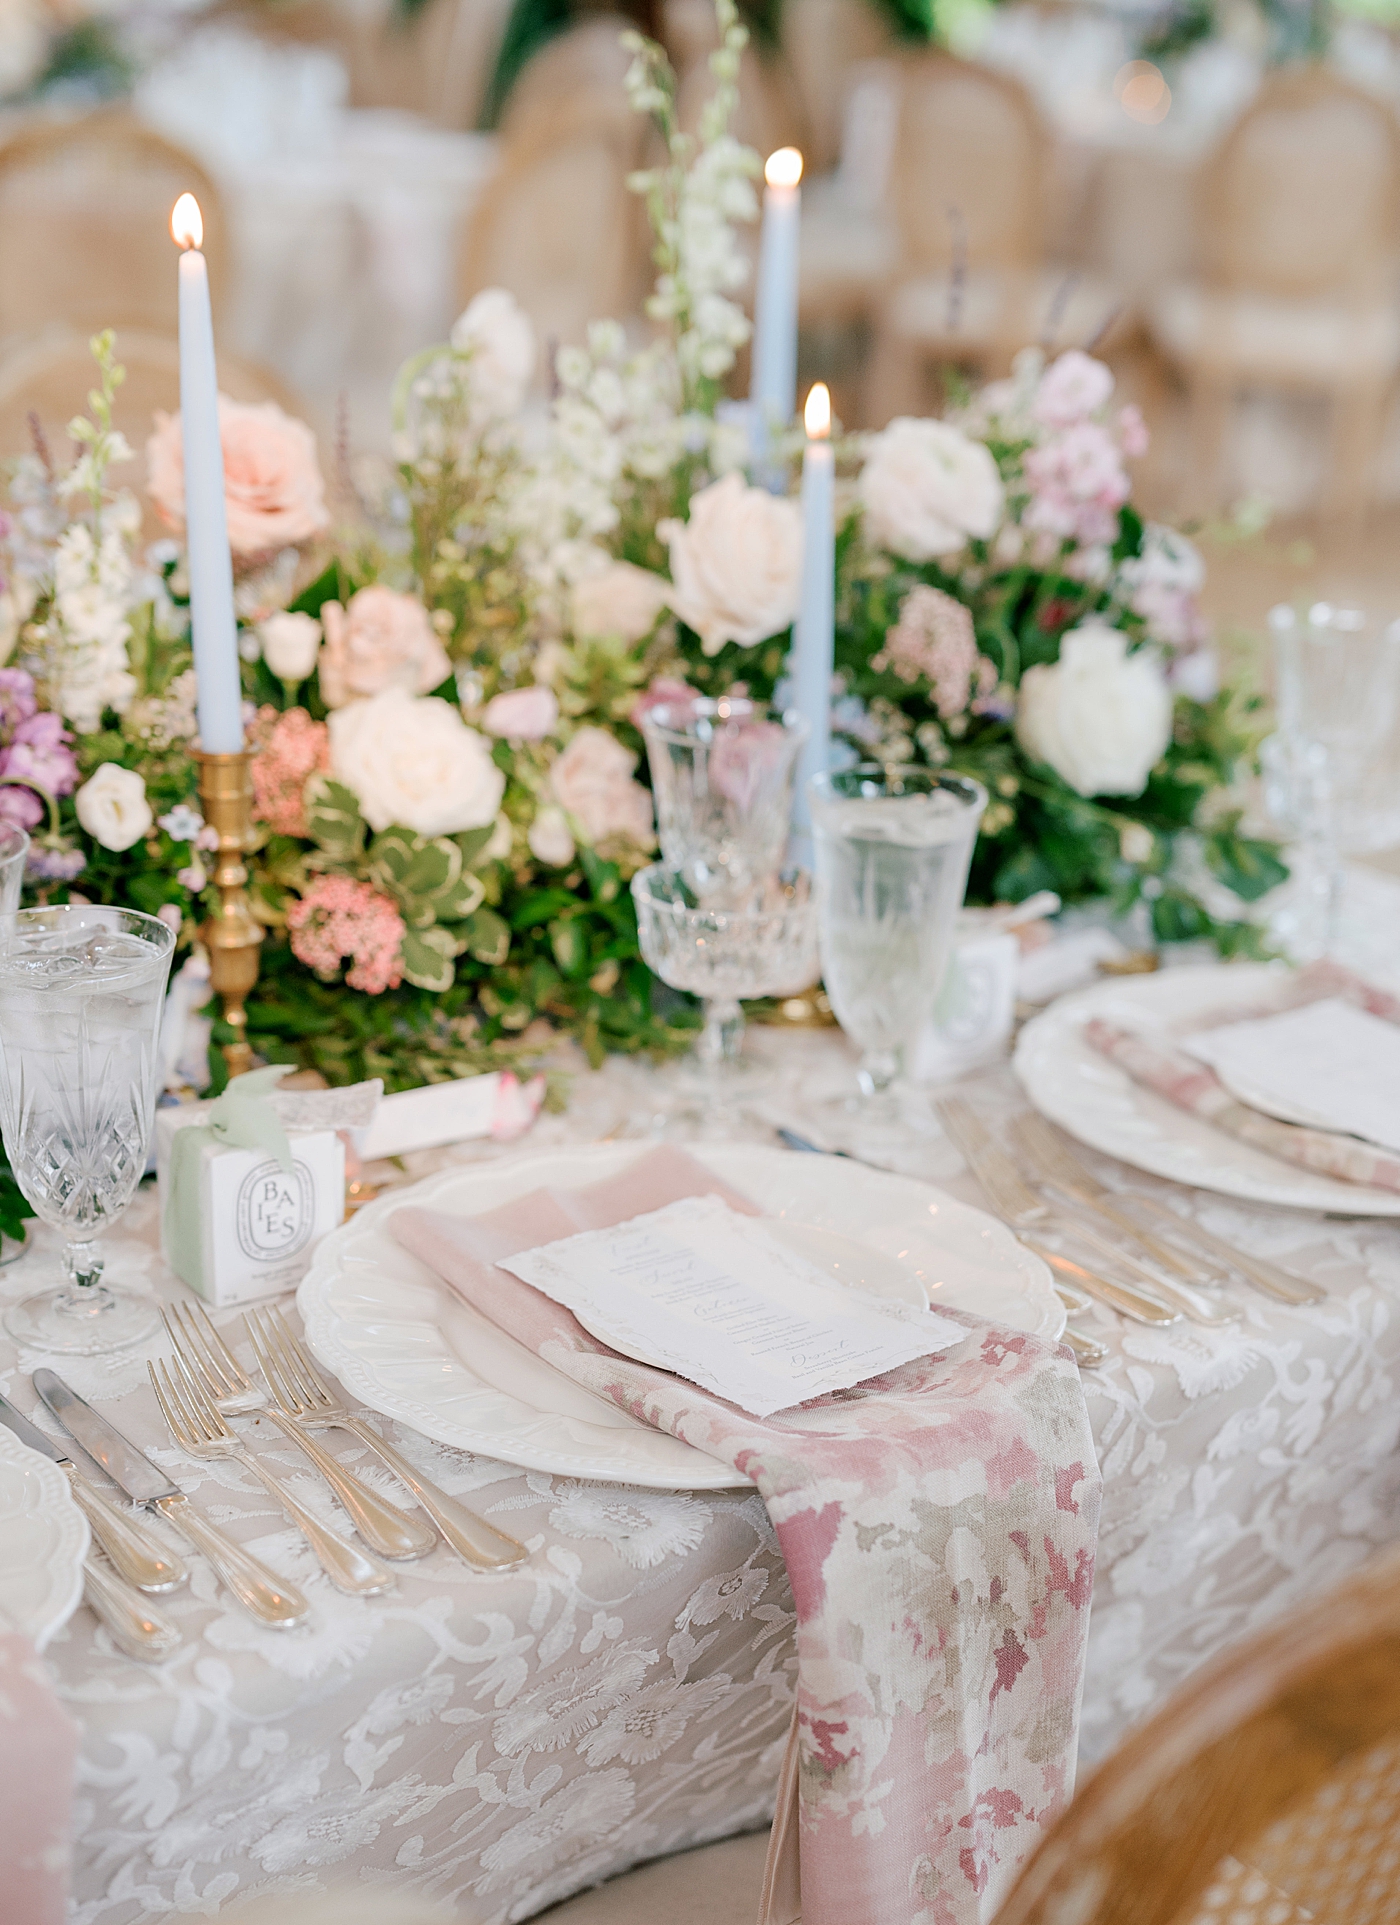 Wedding reception details with candles | Image by Hope Helmuth Photography